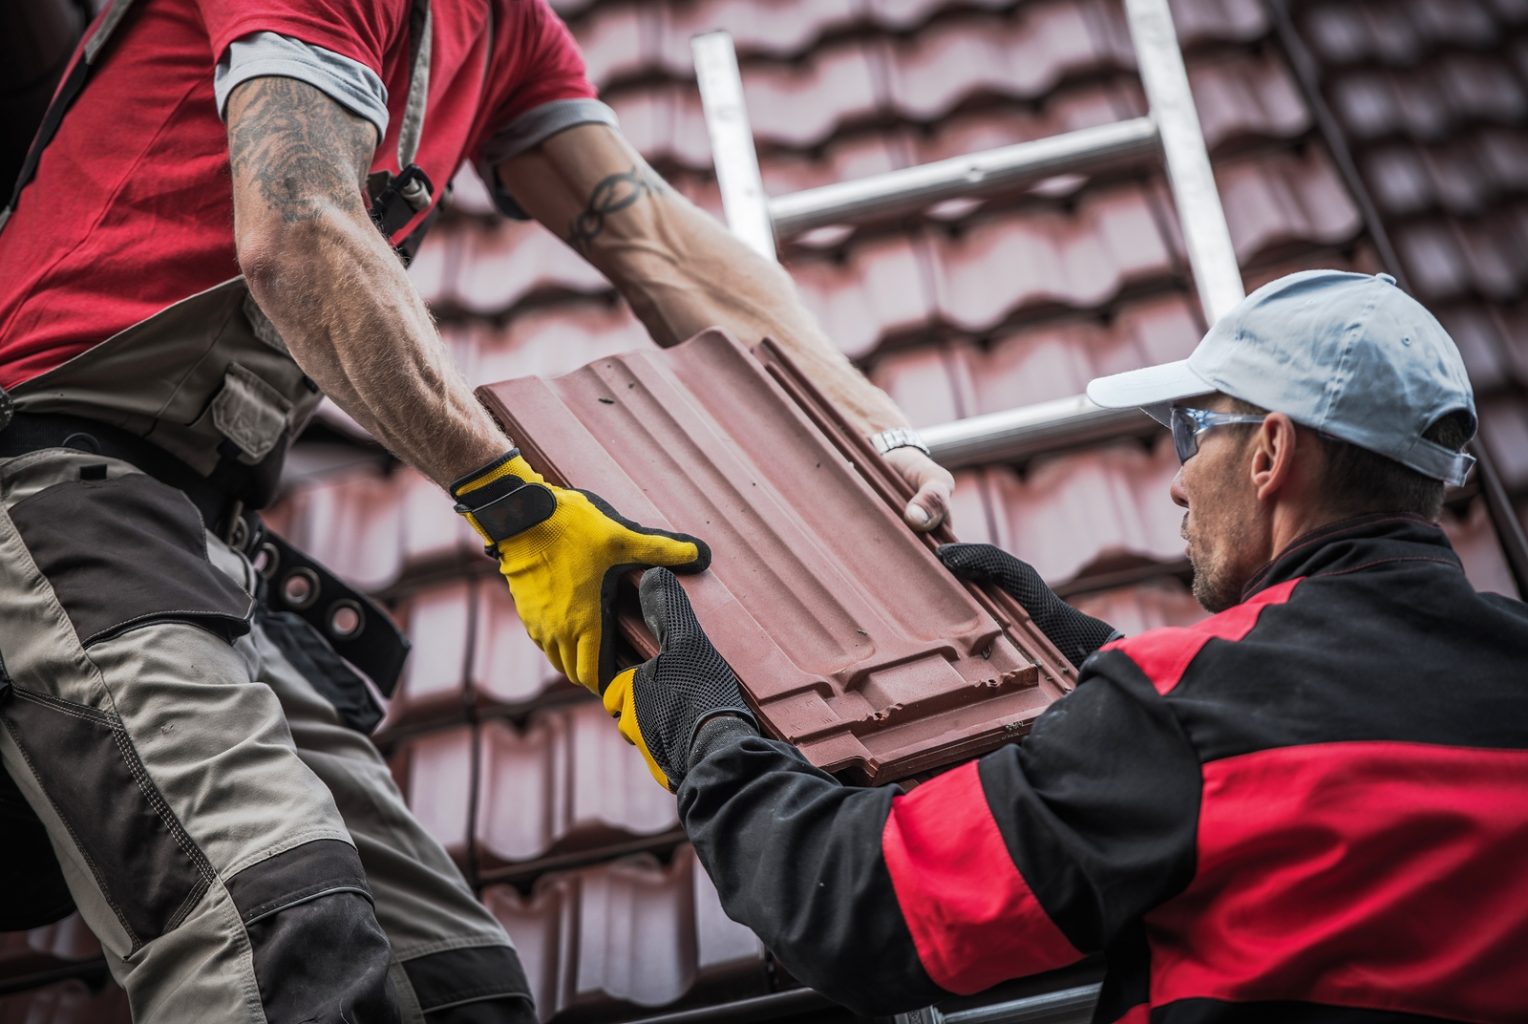 How to Hire The Right Roofing Contractor For The Job